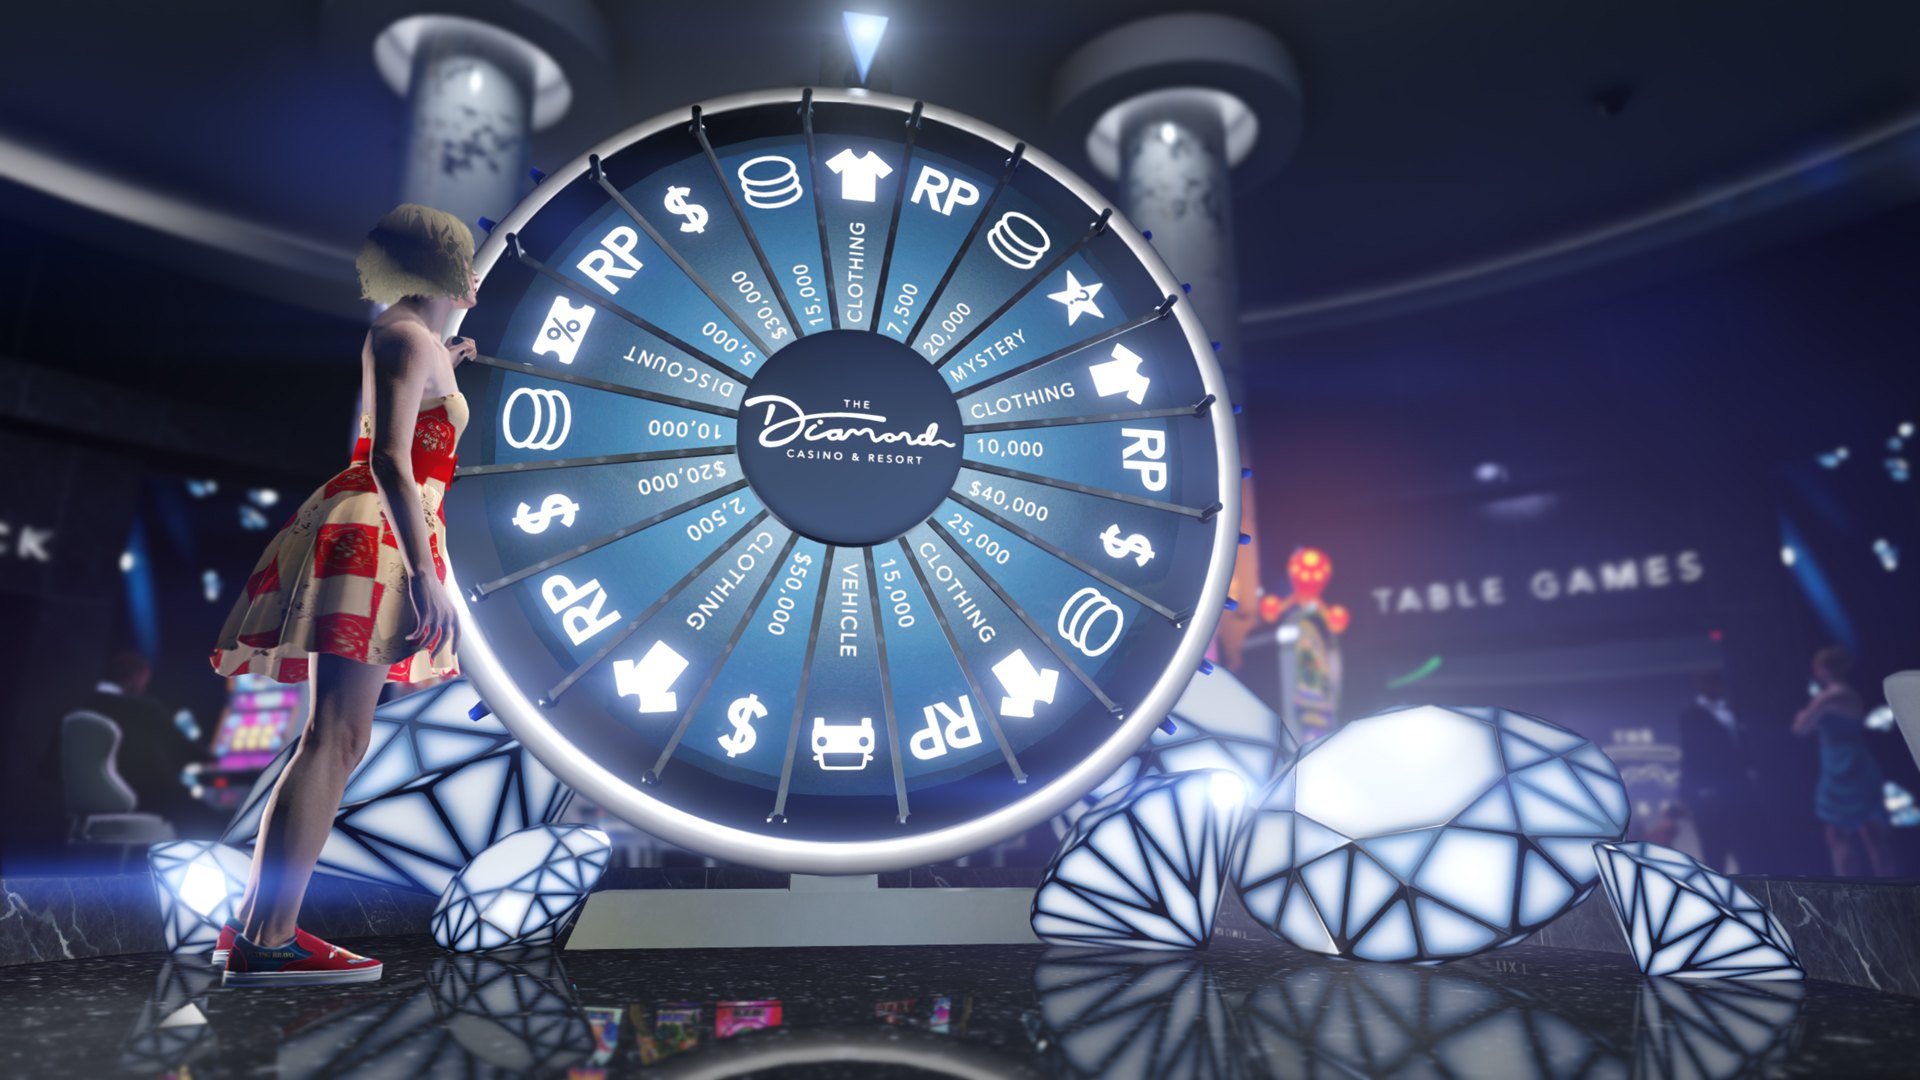 The Diamond Casino & Resort Now Open in GTA Online, Adding Lots of New  Content